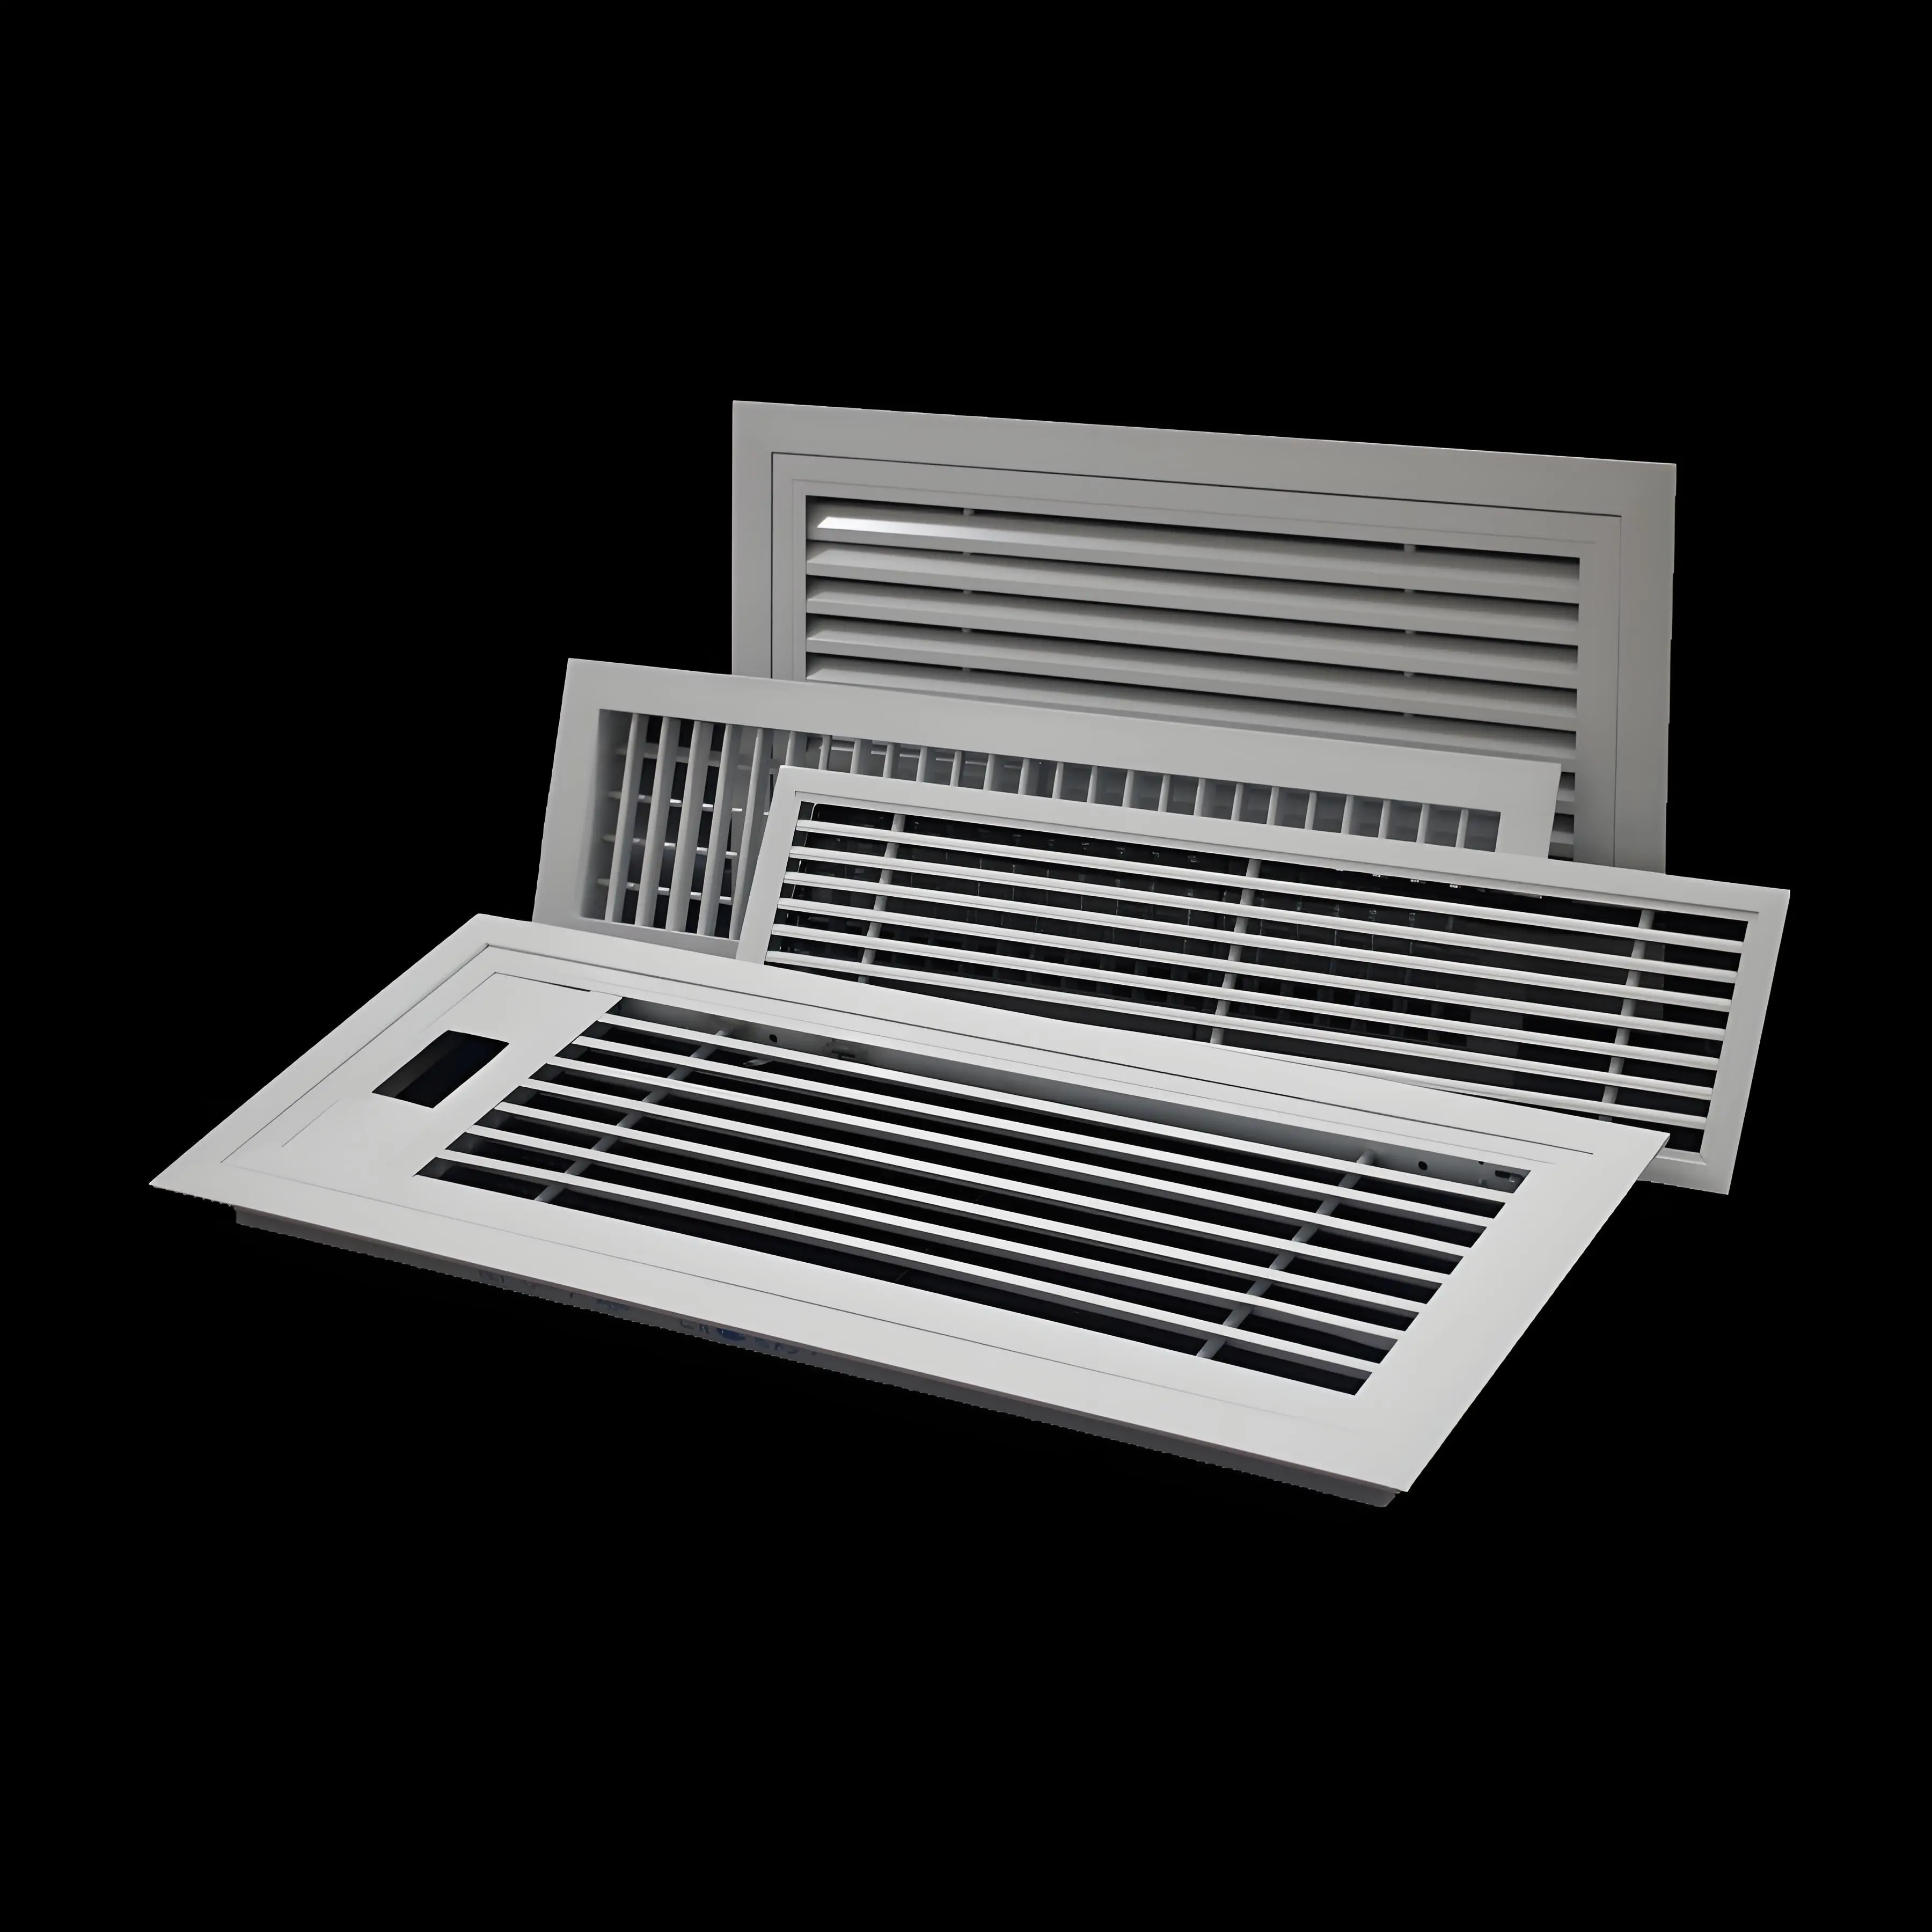 3" X 10" Floor Register with Louvered Design Fixed Blades Return Supply Air Grill with Damper